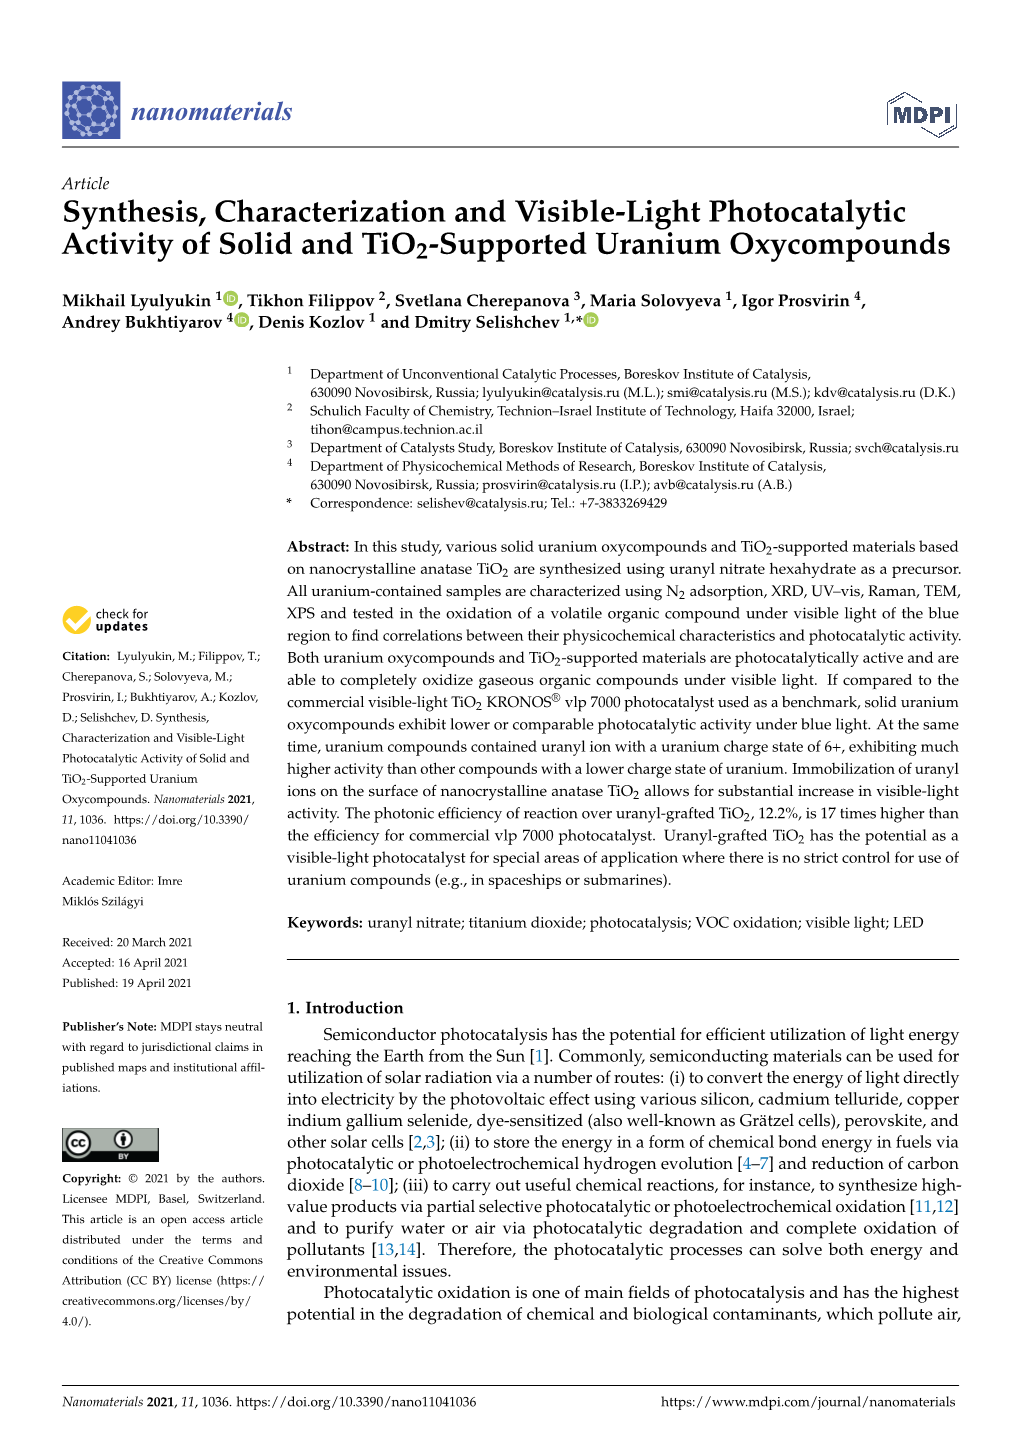 Synthesis, Characterization and Visible-Light Photocatalytic Activity of Solid and Tio2-Supported Uranium Oxycompounds